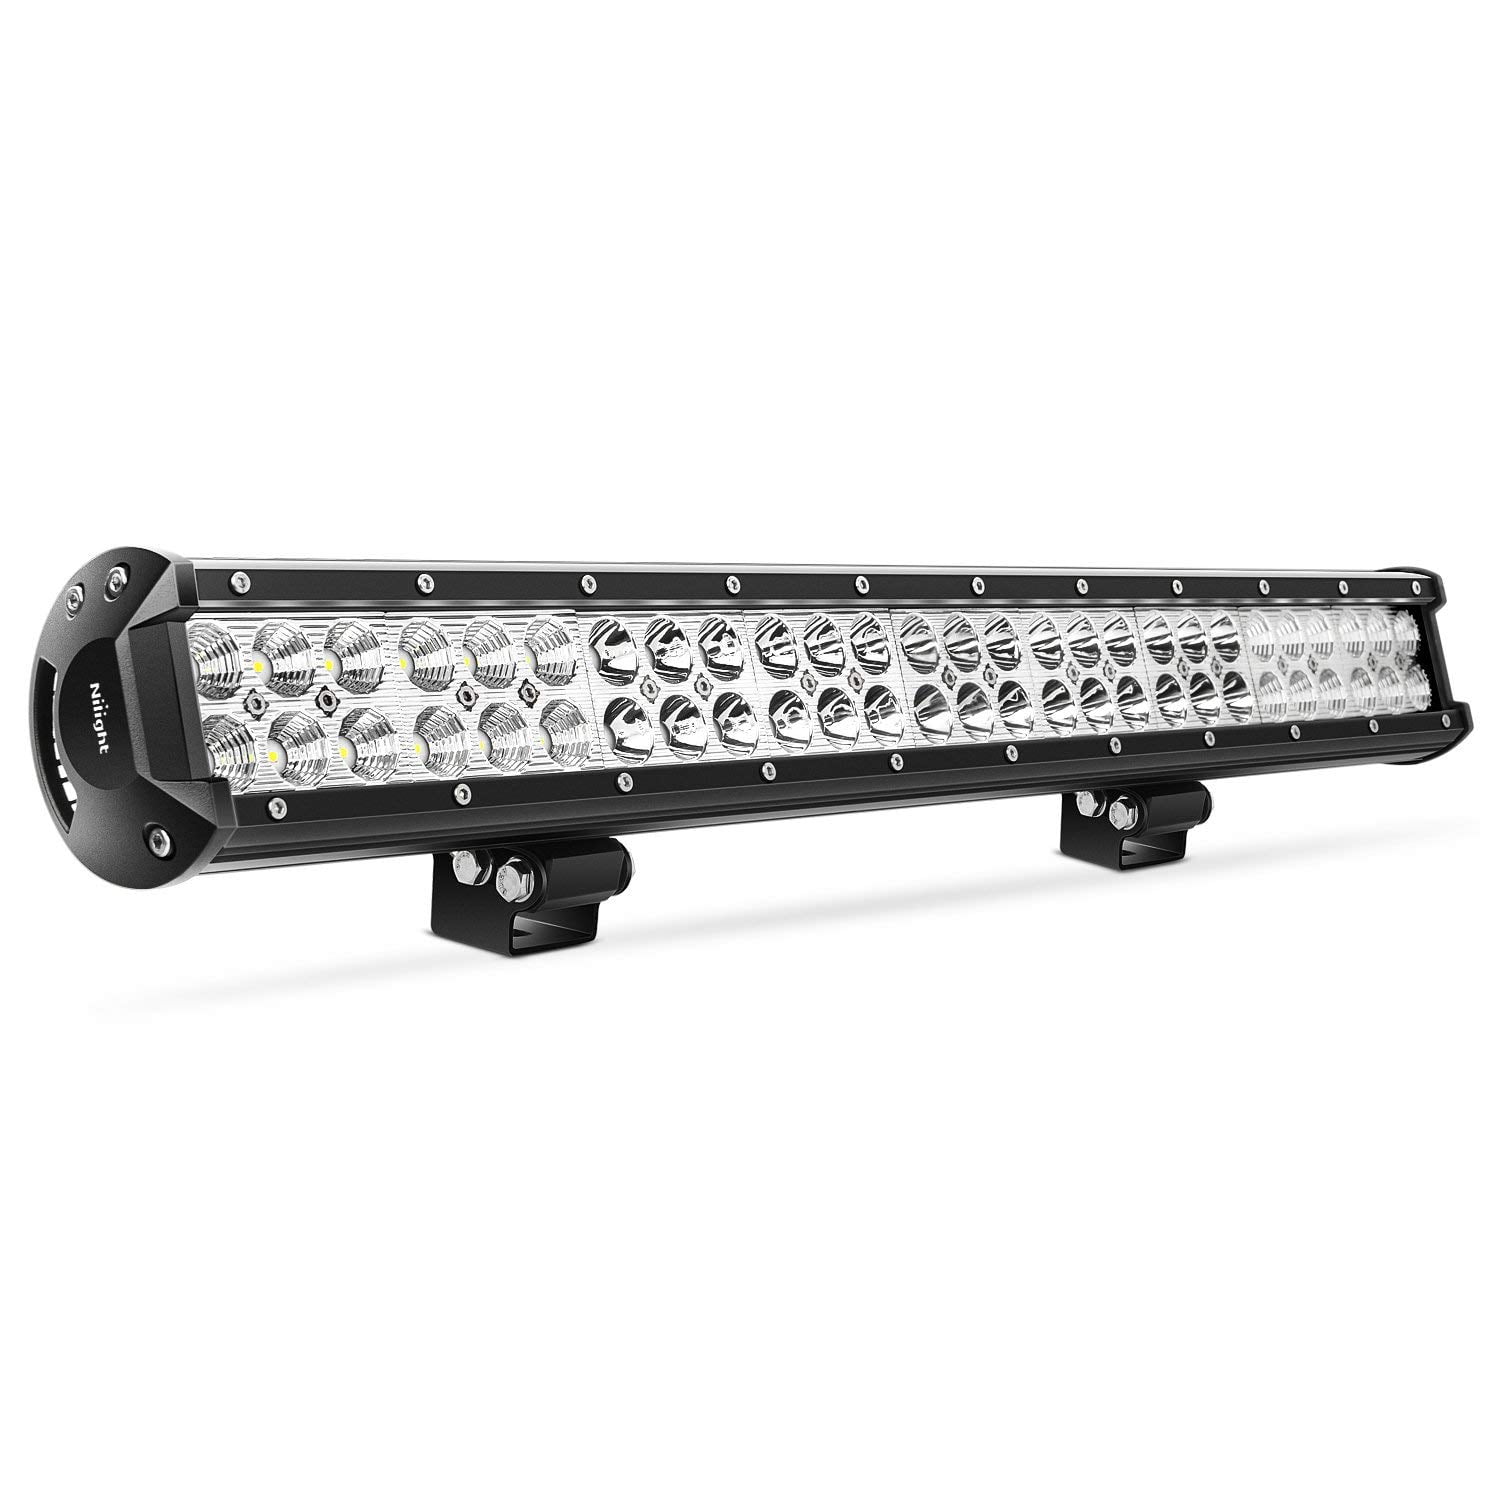 25INCH 162W SLIM LED LIGHT BAR FLOOD SPOT FIT OFFROAD 4X4WD FORD DRIVING LAMP 24